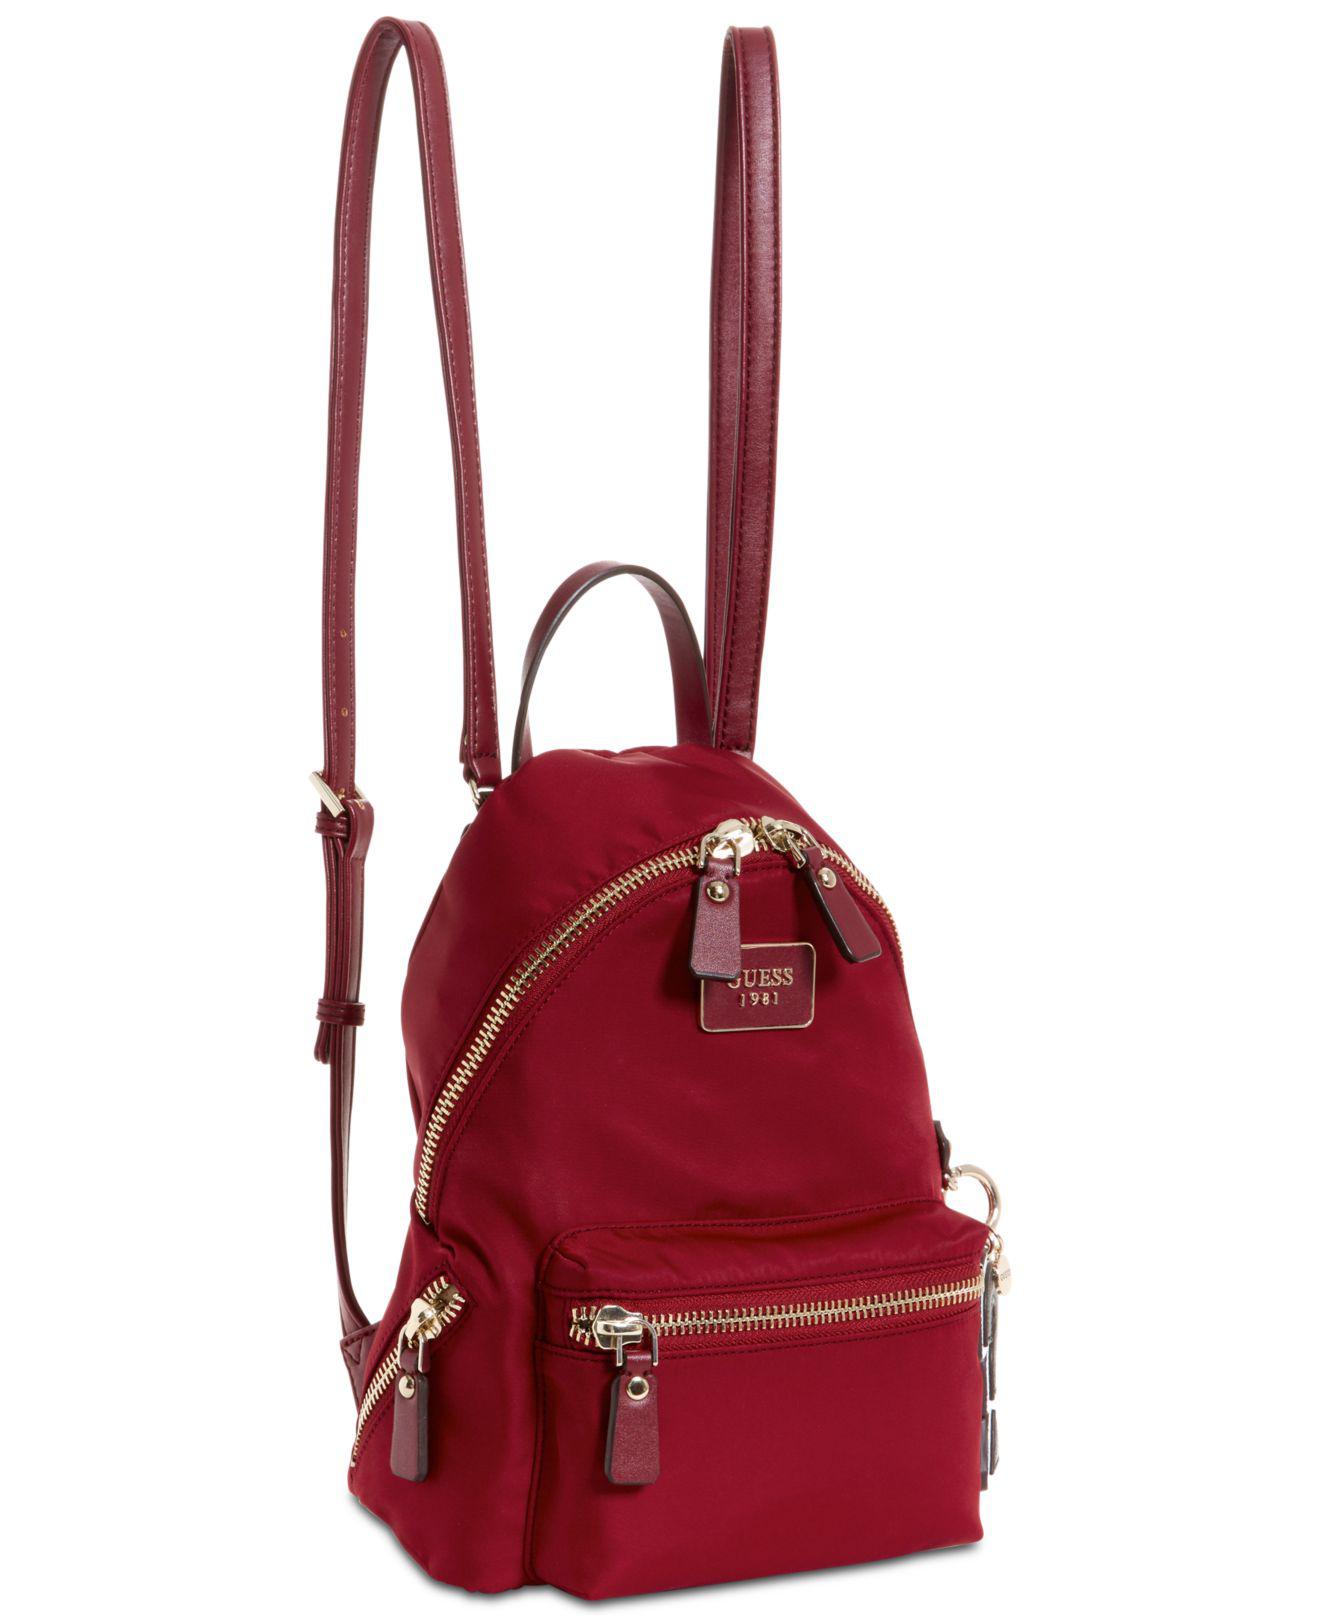 Guess Cool School Small Leeza Backpack in Red - Lyst